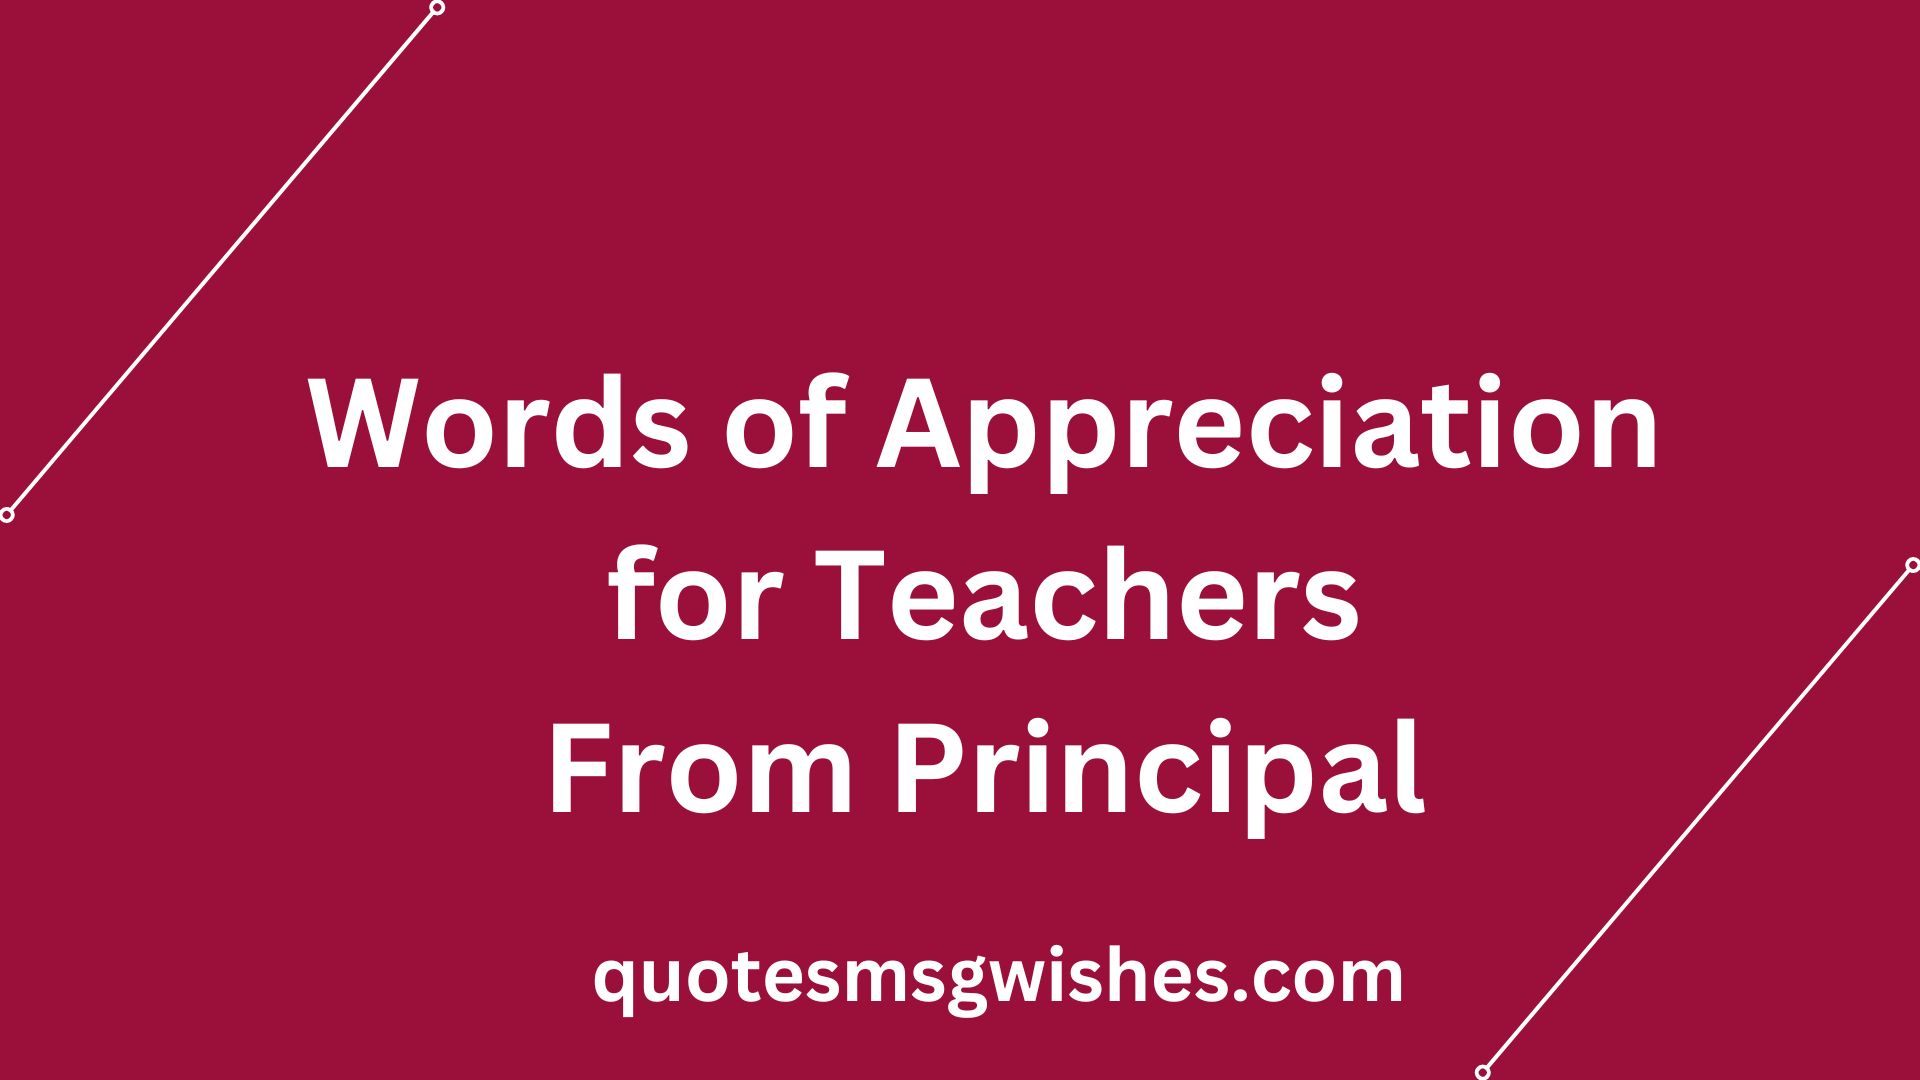 Words of Appreciation for Teachers From Principal